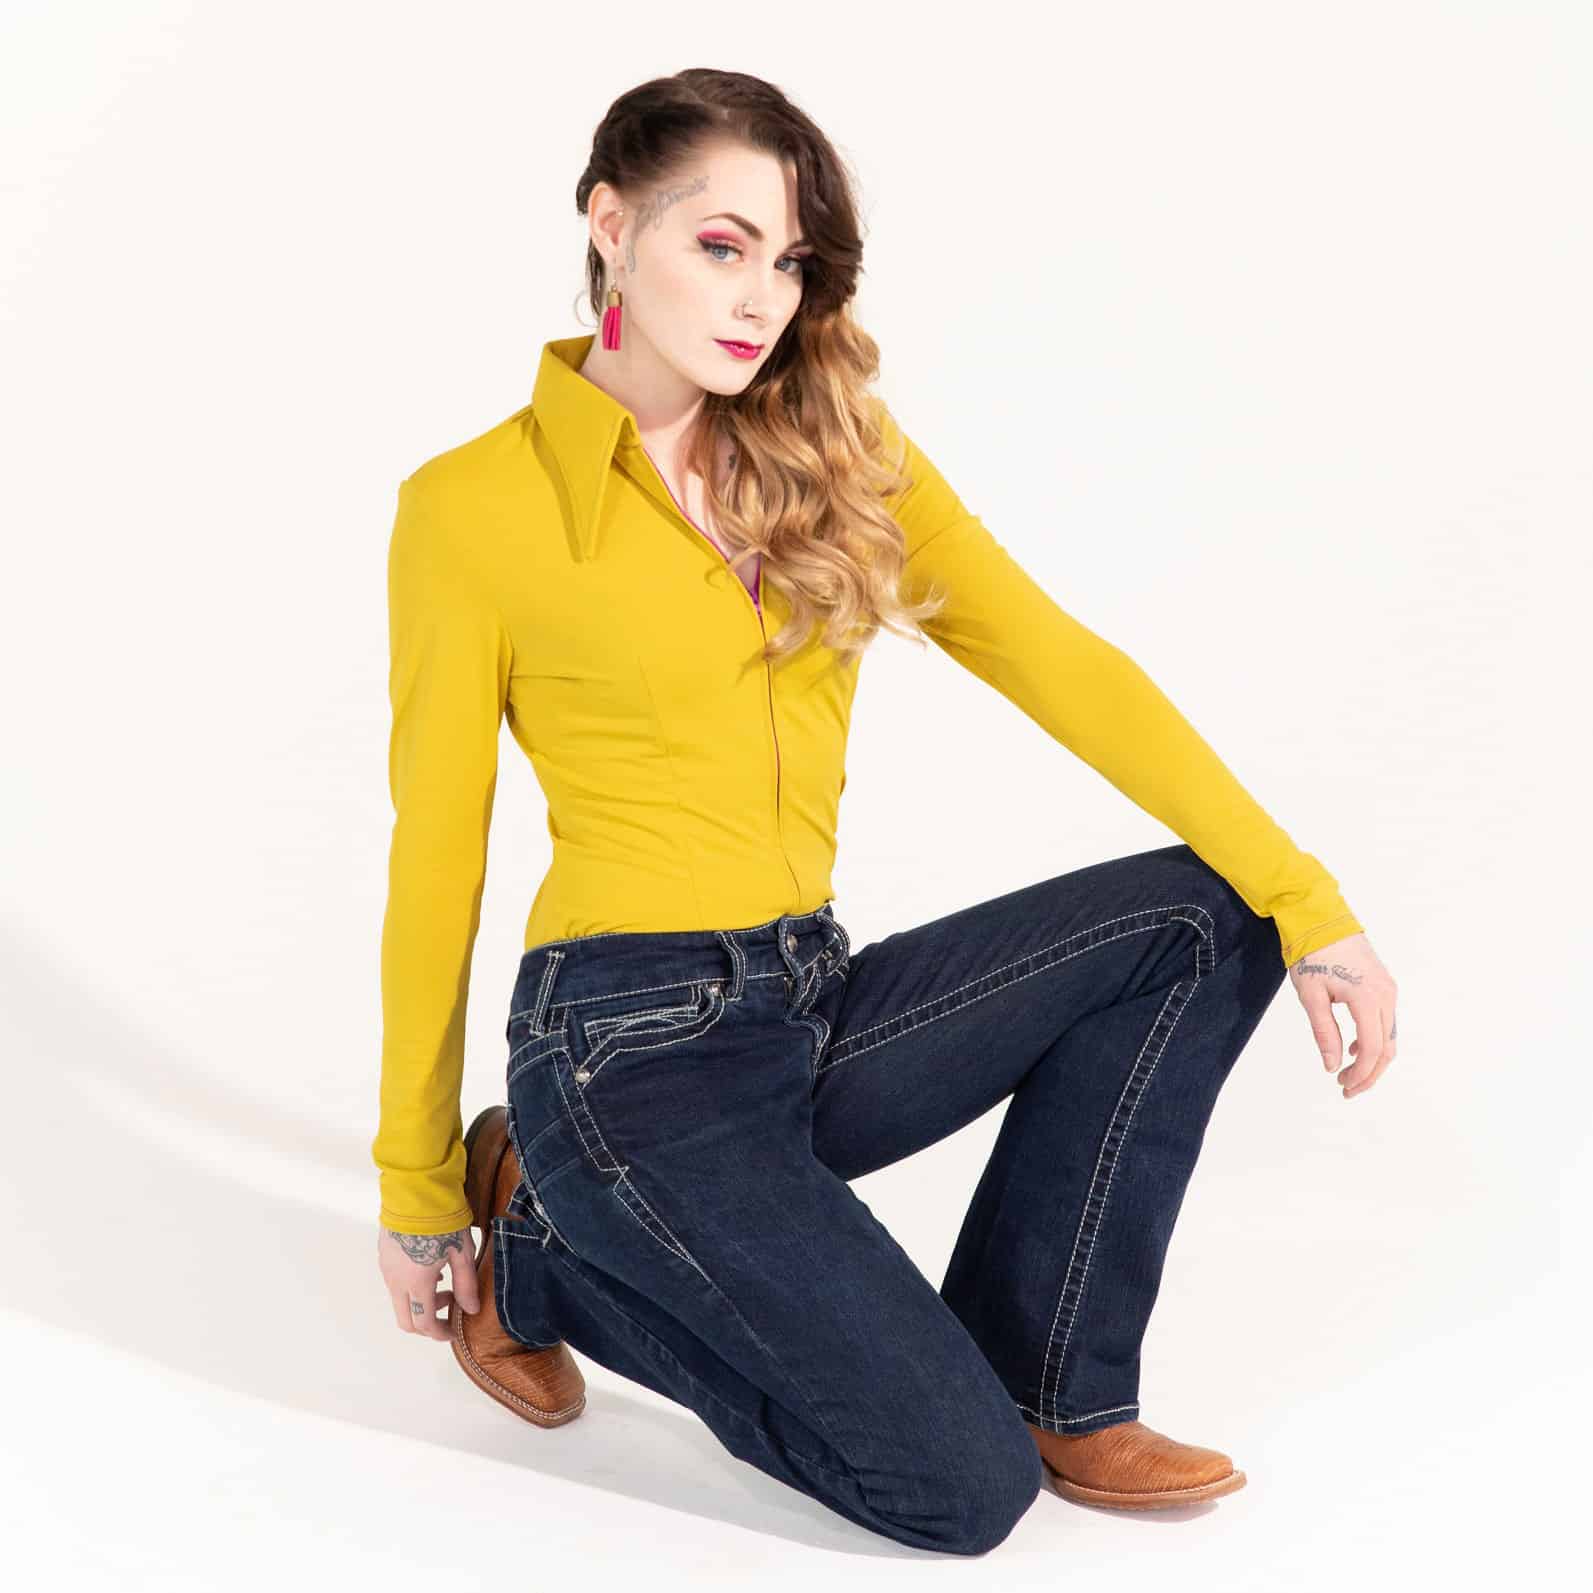 Mustard Solid (Yellow), $179 from Sundial Show clothes